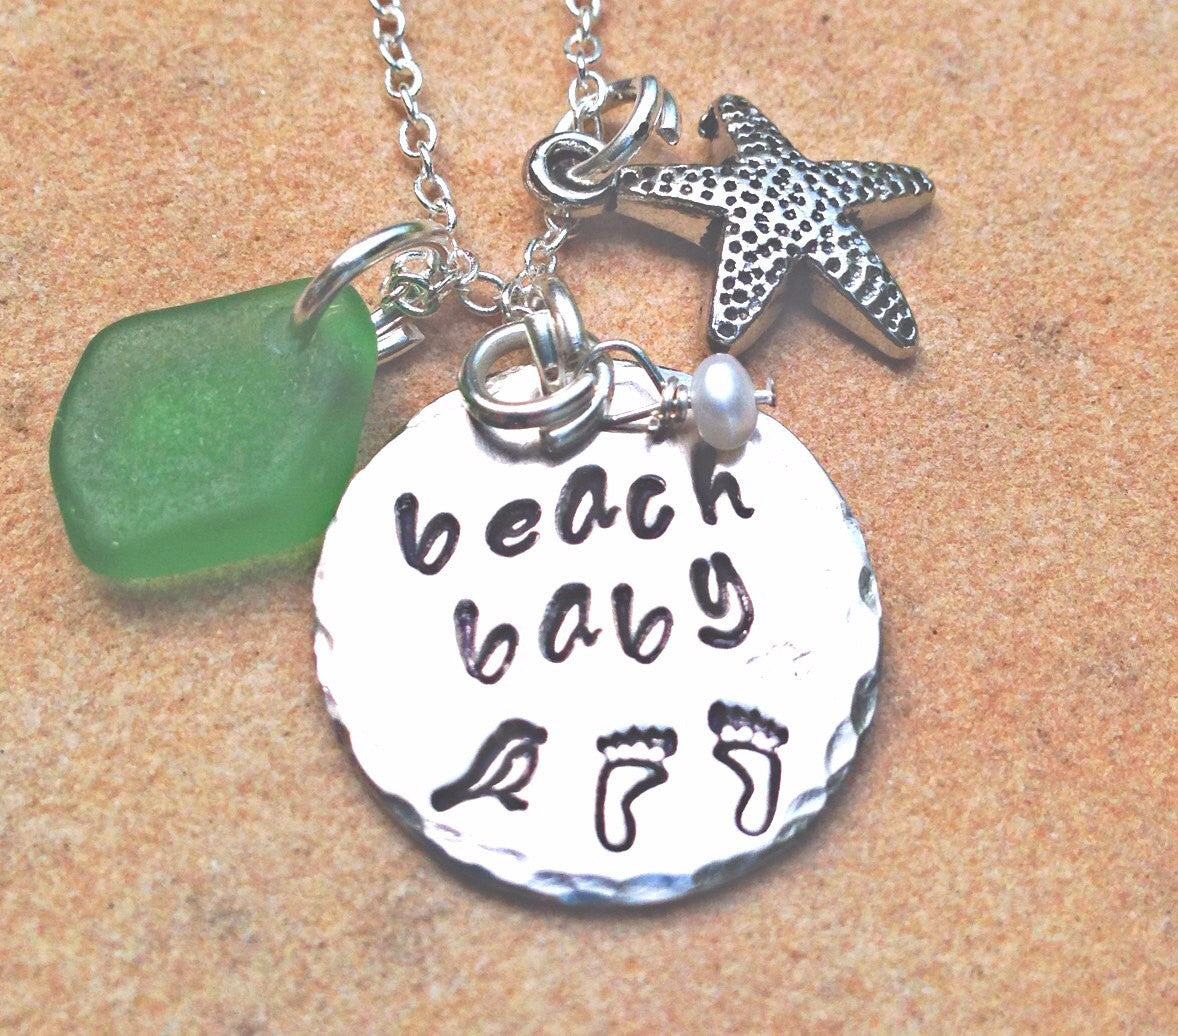 necklace, beach baby,beach girl necklace, beach jewelry, Hawaiian jewelry, starfish necklace, sea glass necklace, personalized gifts, beach - Natashaaloha, jewelry, bracelets, necklace, keychains, fishing lures, gifts for men, charms, personalized, 